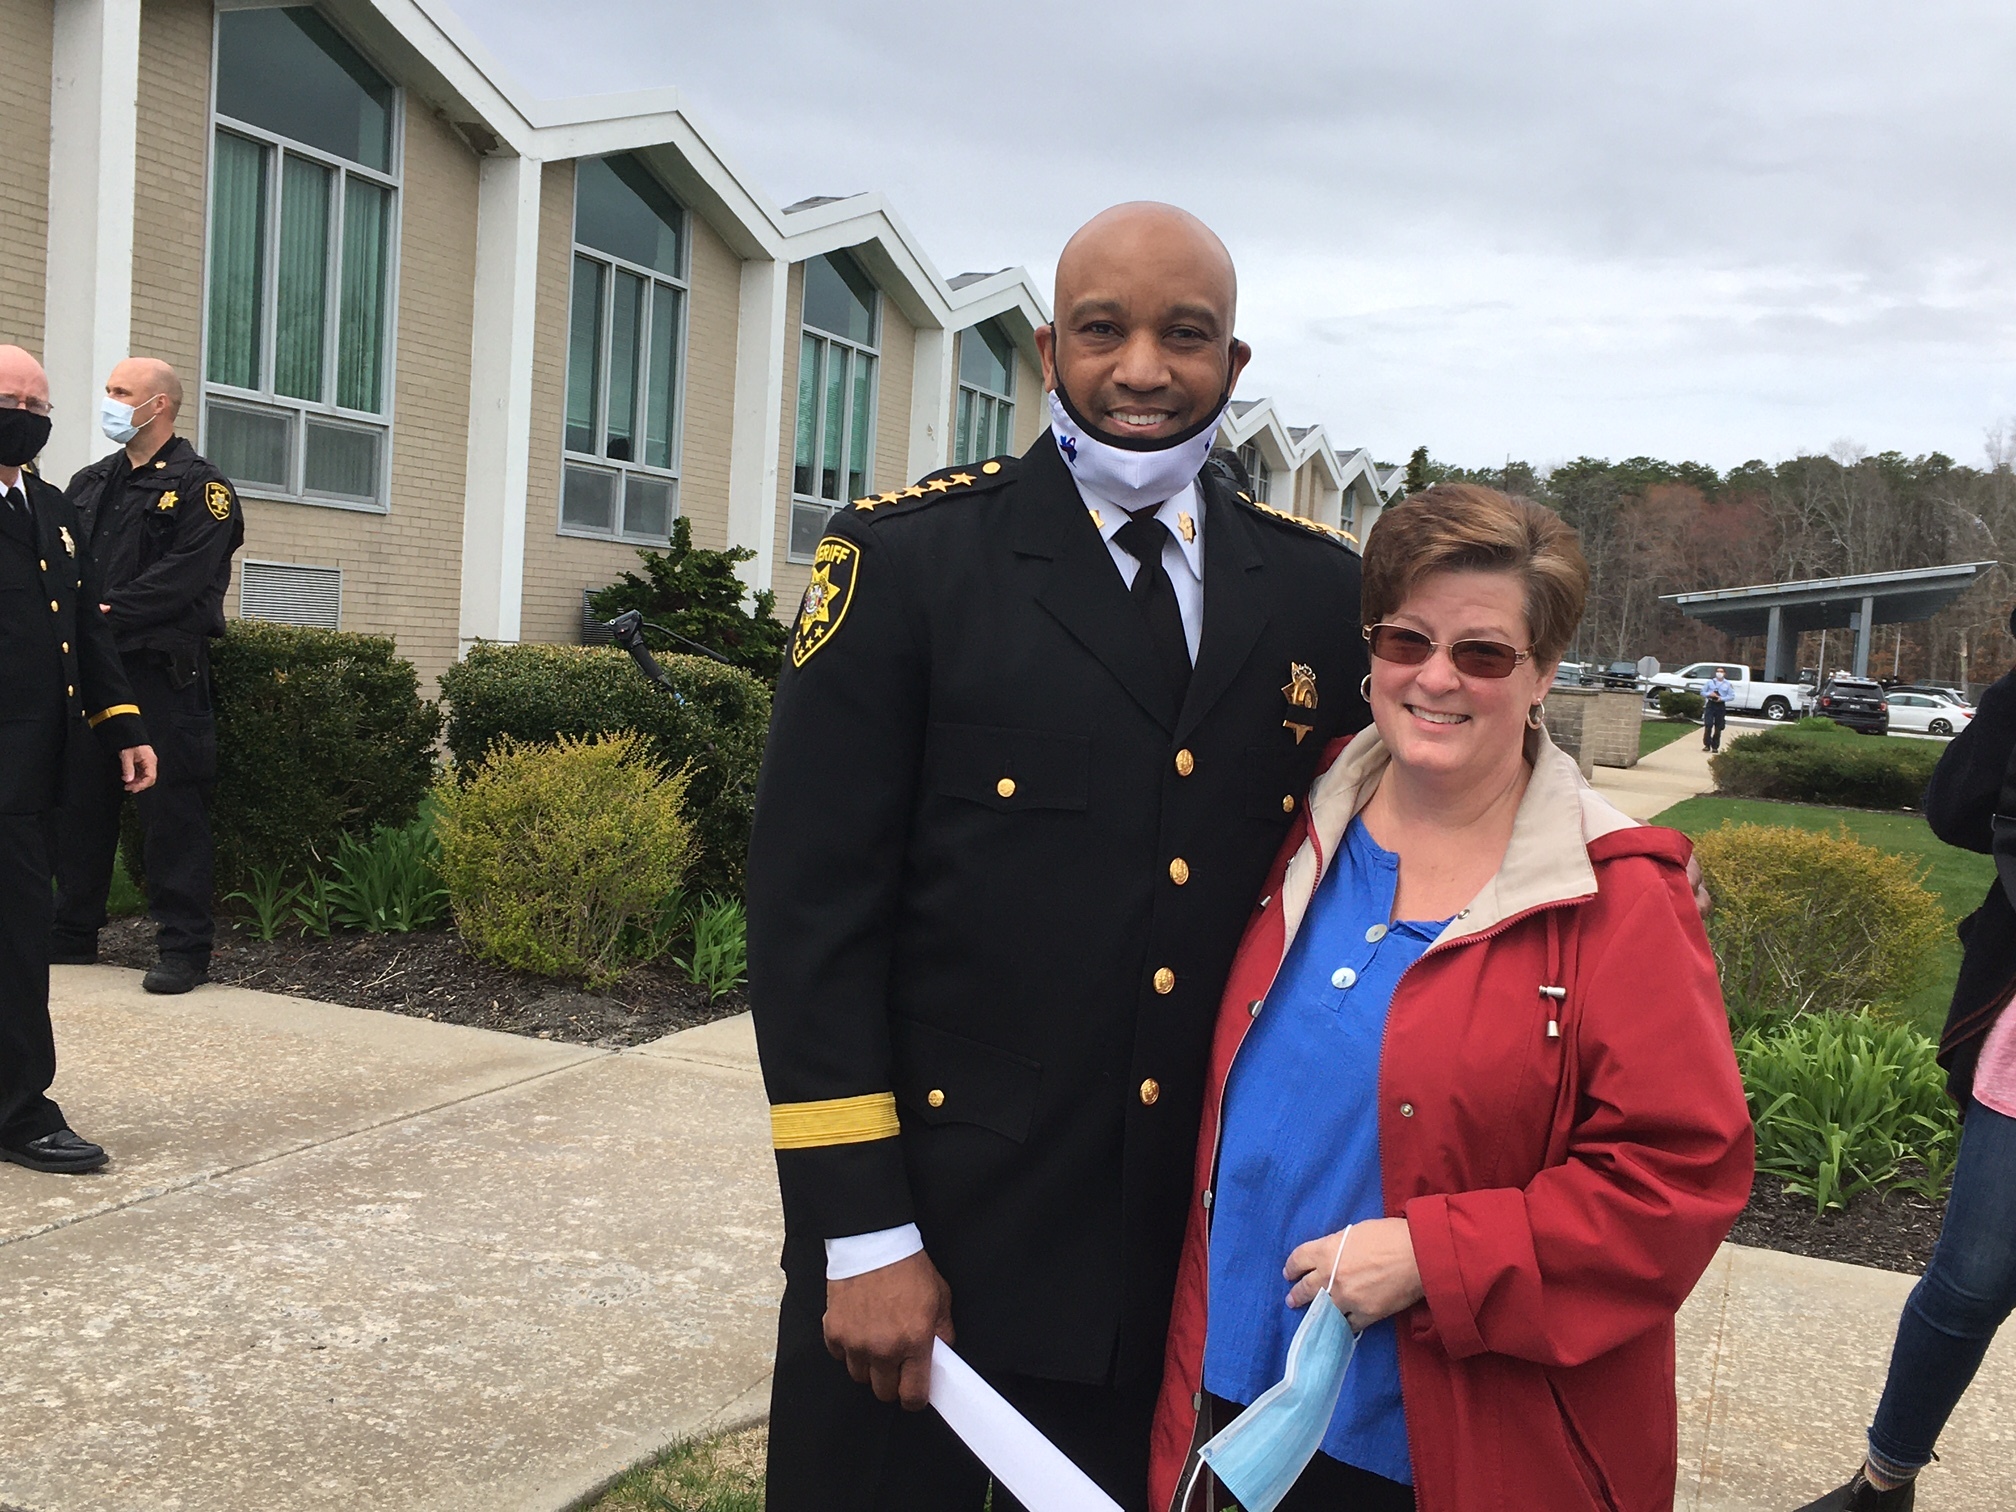 Sheriff Errol D. Toulon, Jr. with Stacey Reister